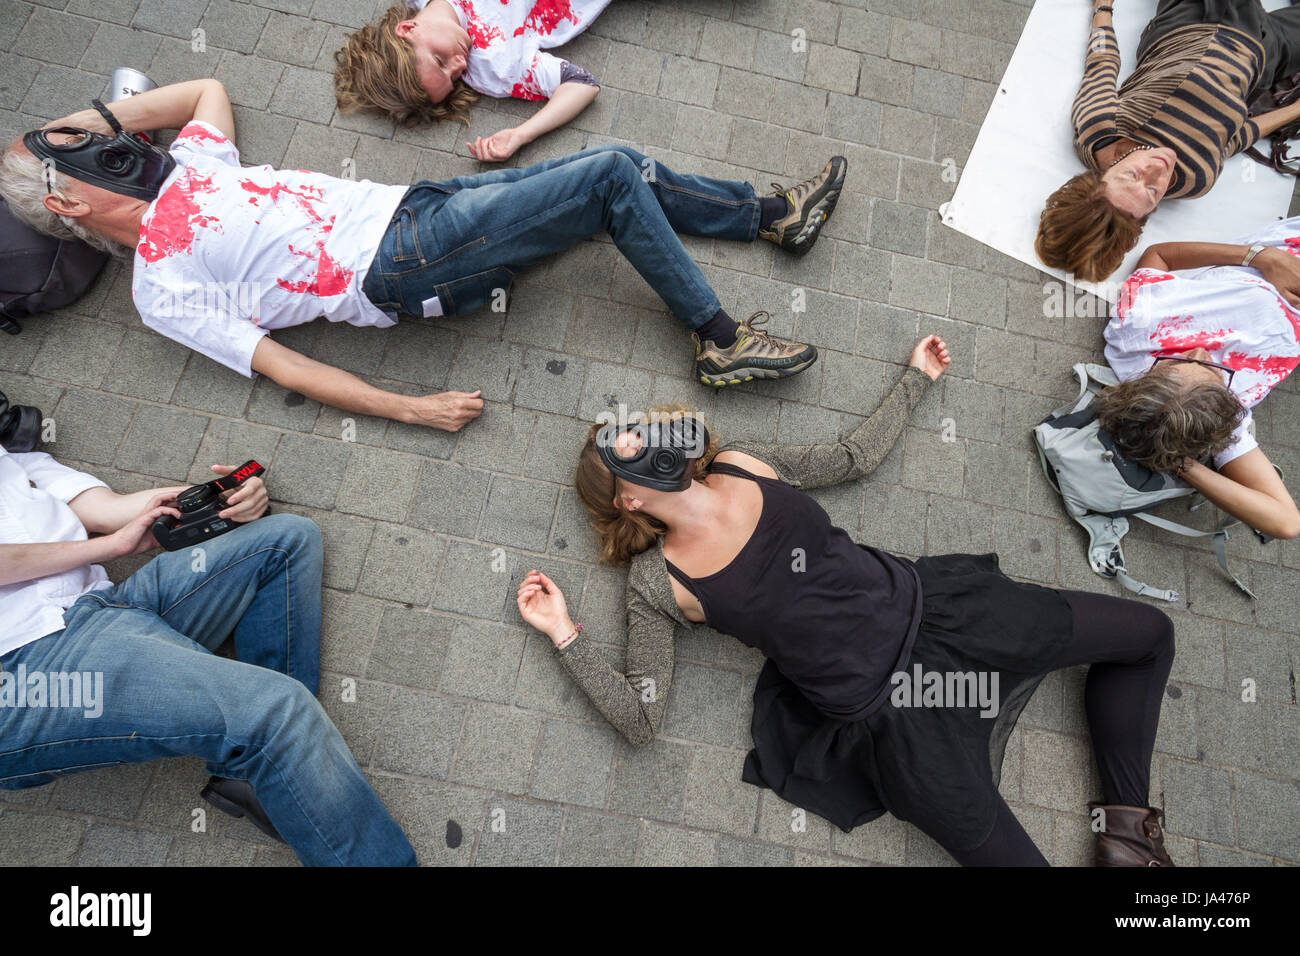 Demonstrators stage a ‘die-in’ protest. Stop the Arms Fair. Anti-war protesters outside Parliament Buildings in London, UK. Stock Photo